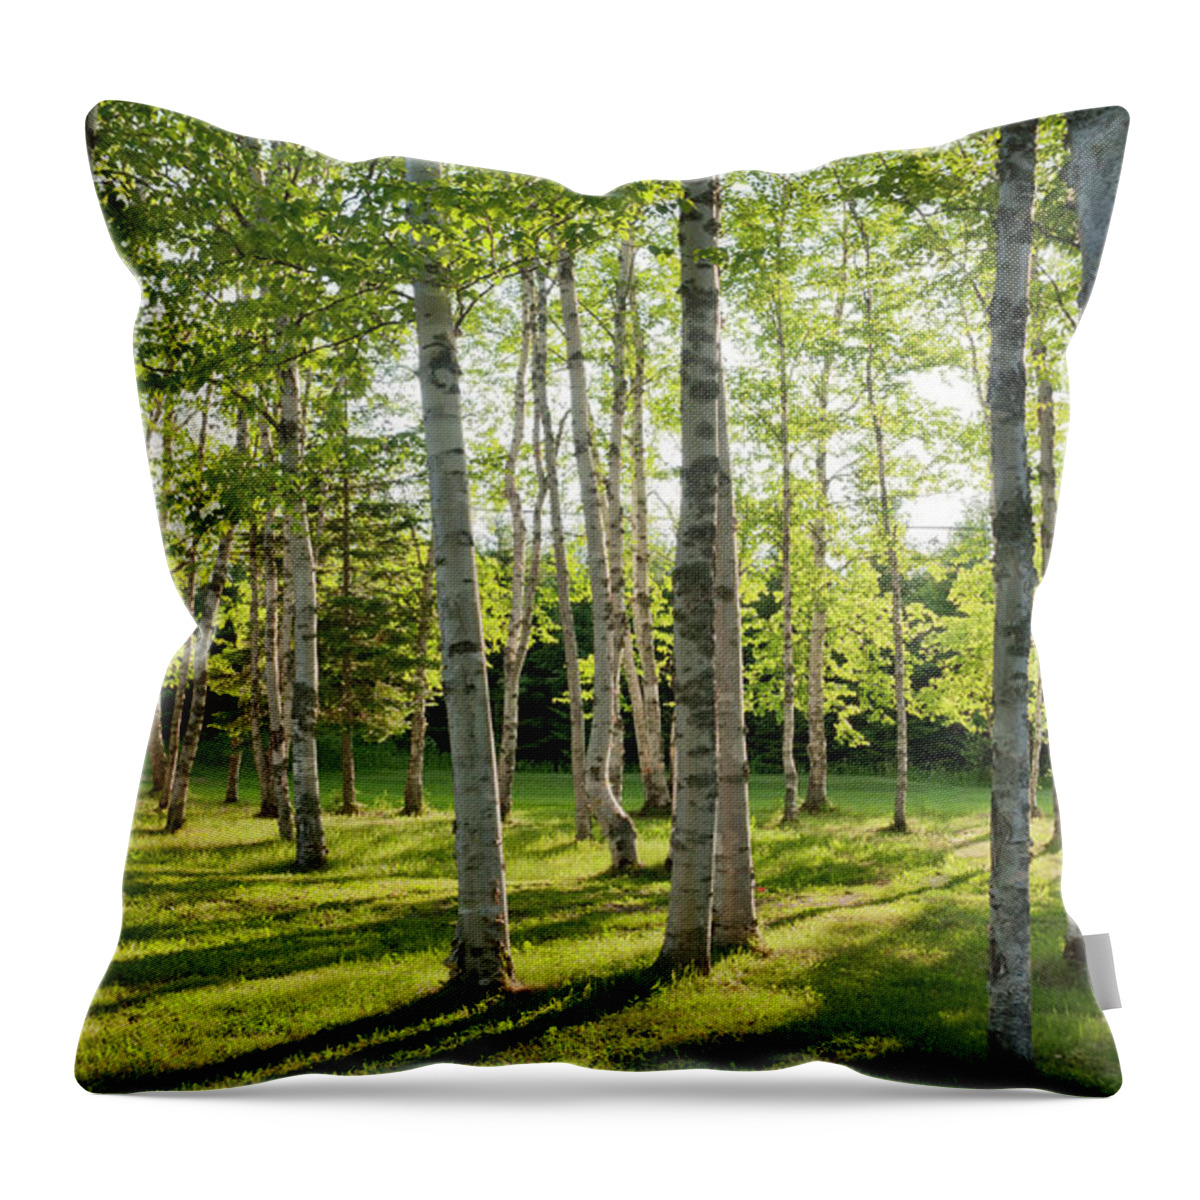 Scenics Throw Pillow featuring the photograph Birch Woodland Habitat by Pokergecko